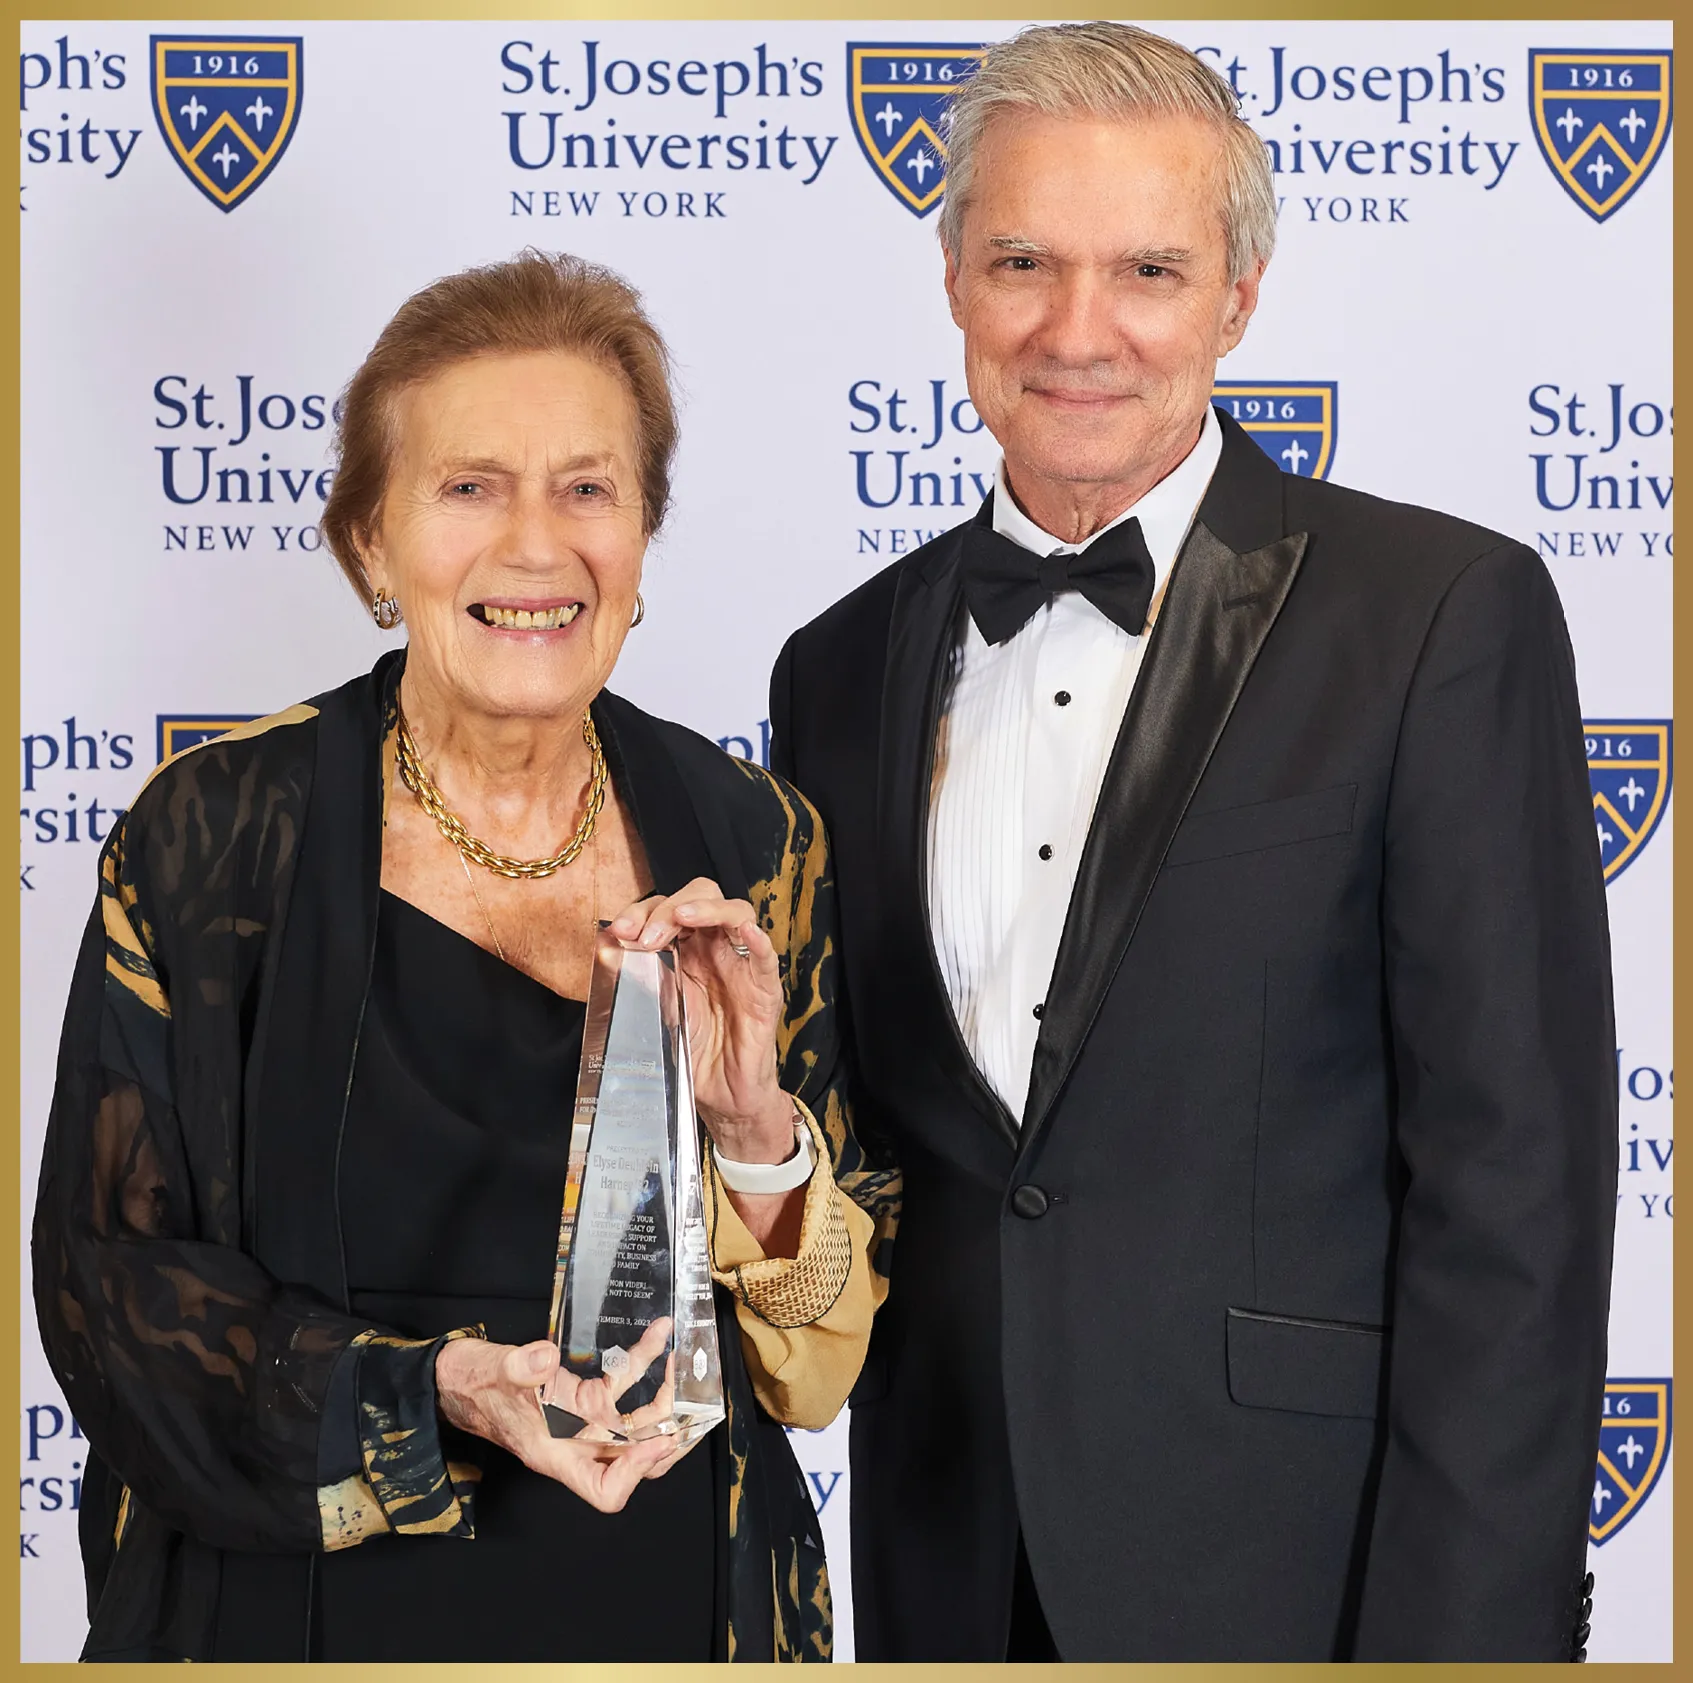 Elyse Deublein Harney ’52 smiles holding a glass award and standing beside a smiling President Boomgaarden